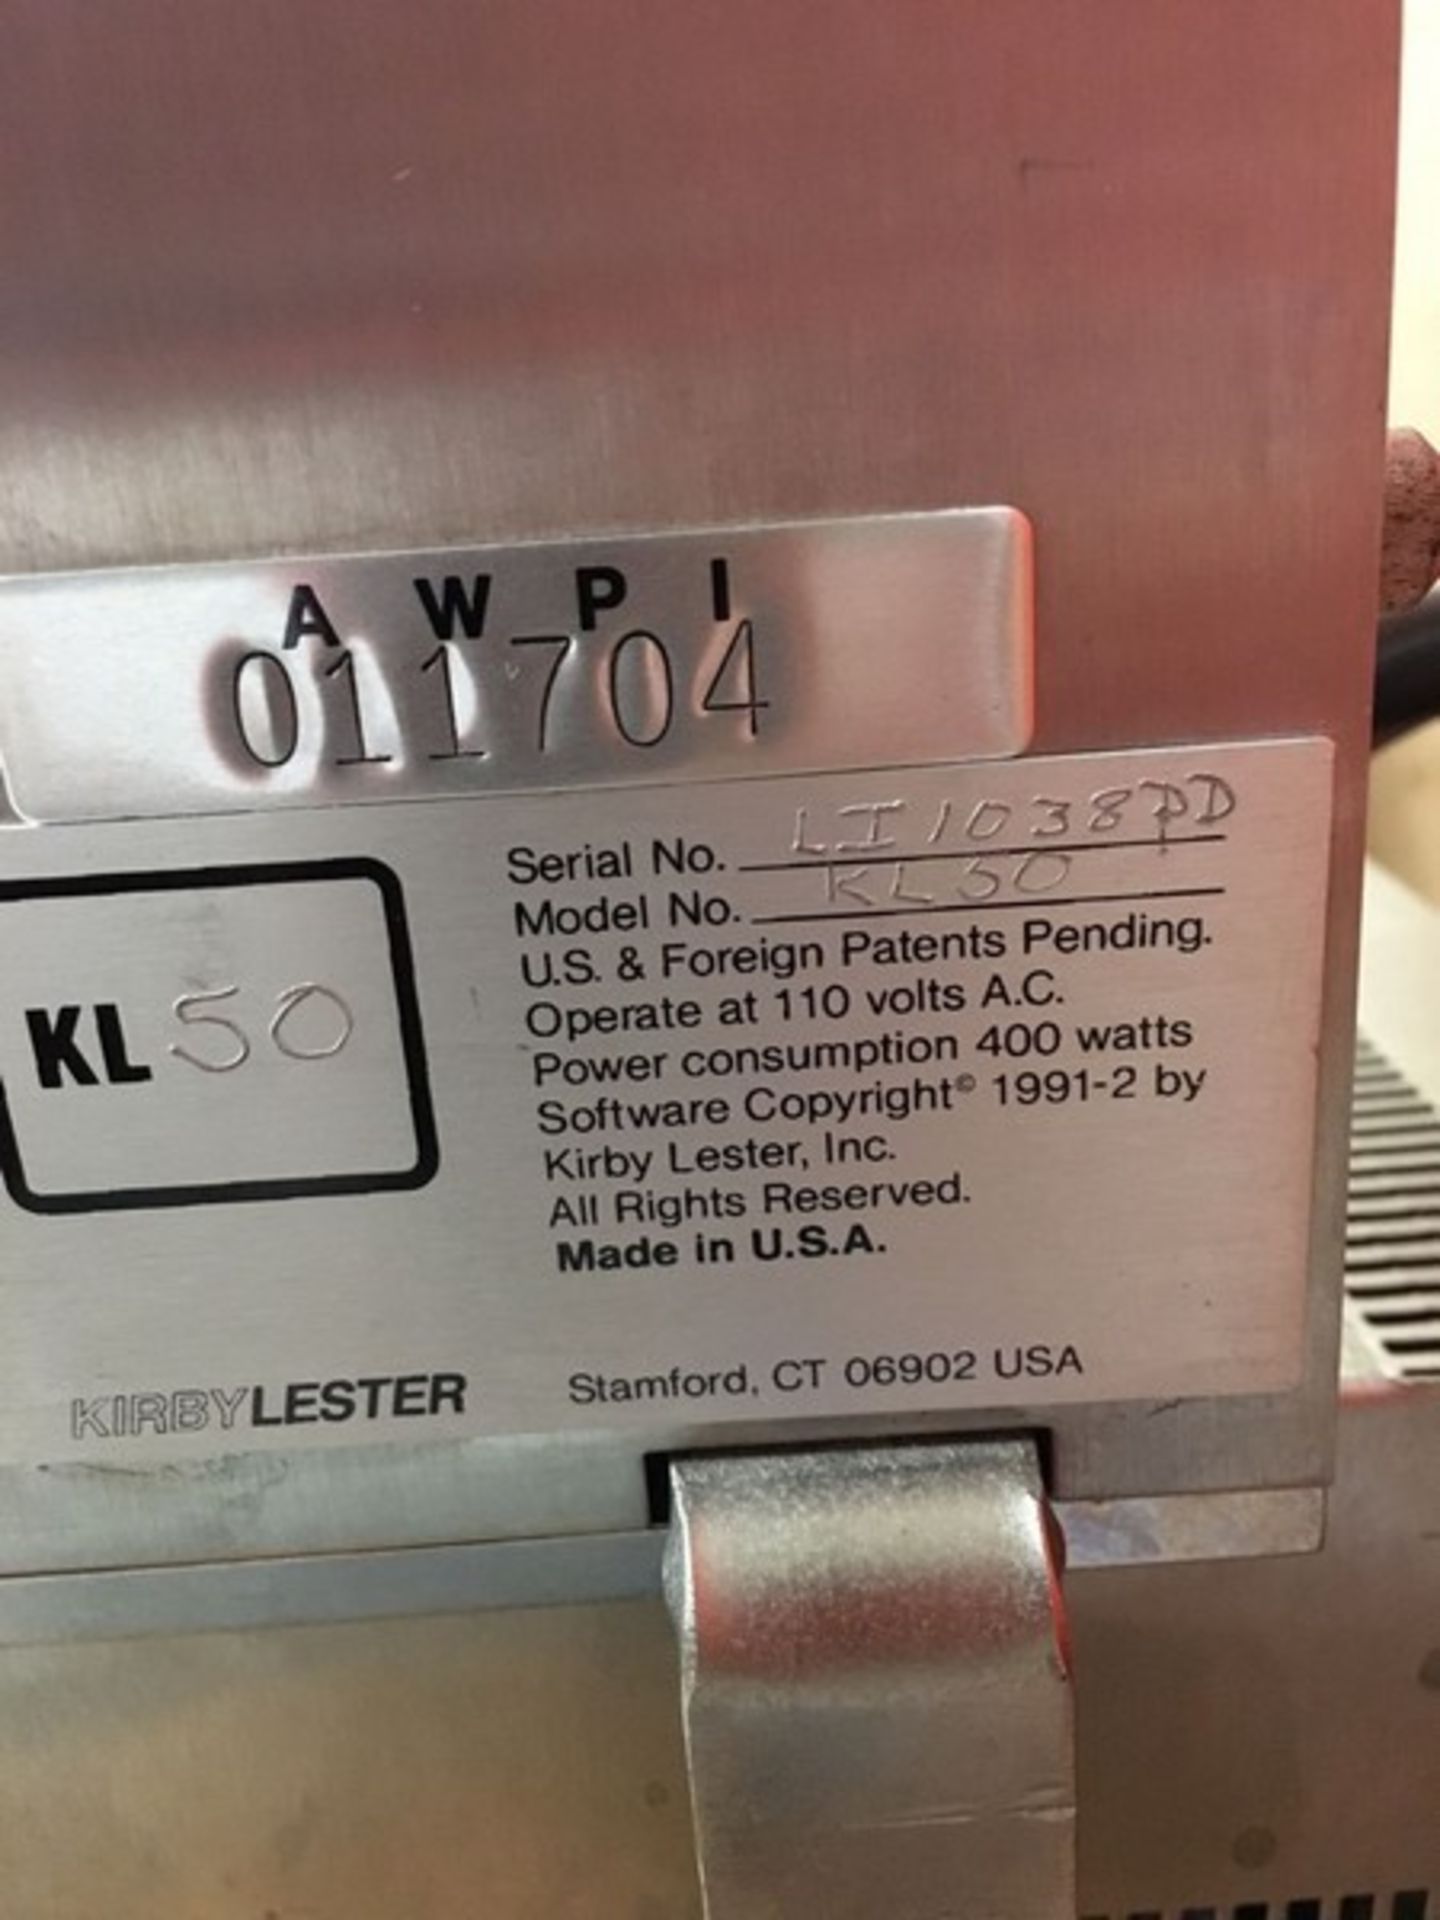 Kirby Lester Counter. Model: KL50, Serial: LI1038PD. As shown in photos. - Image 2 of 2